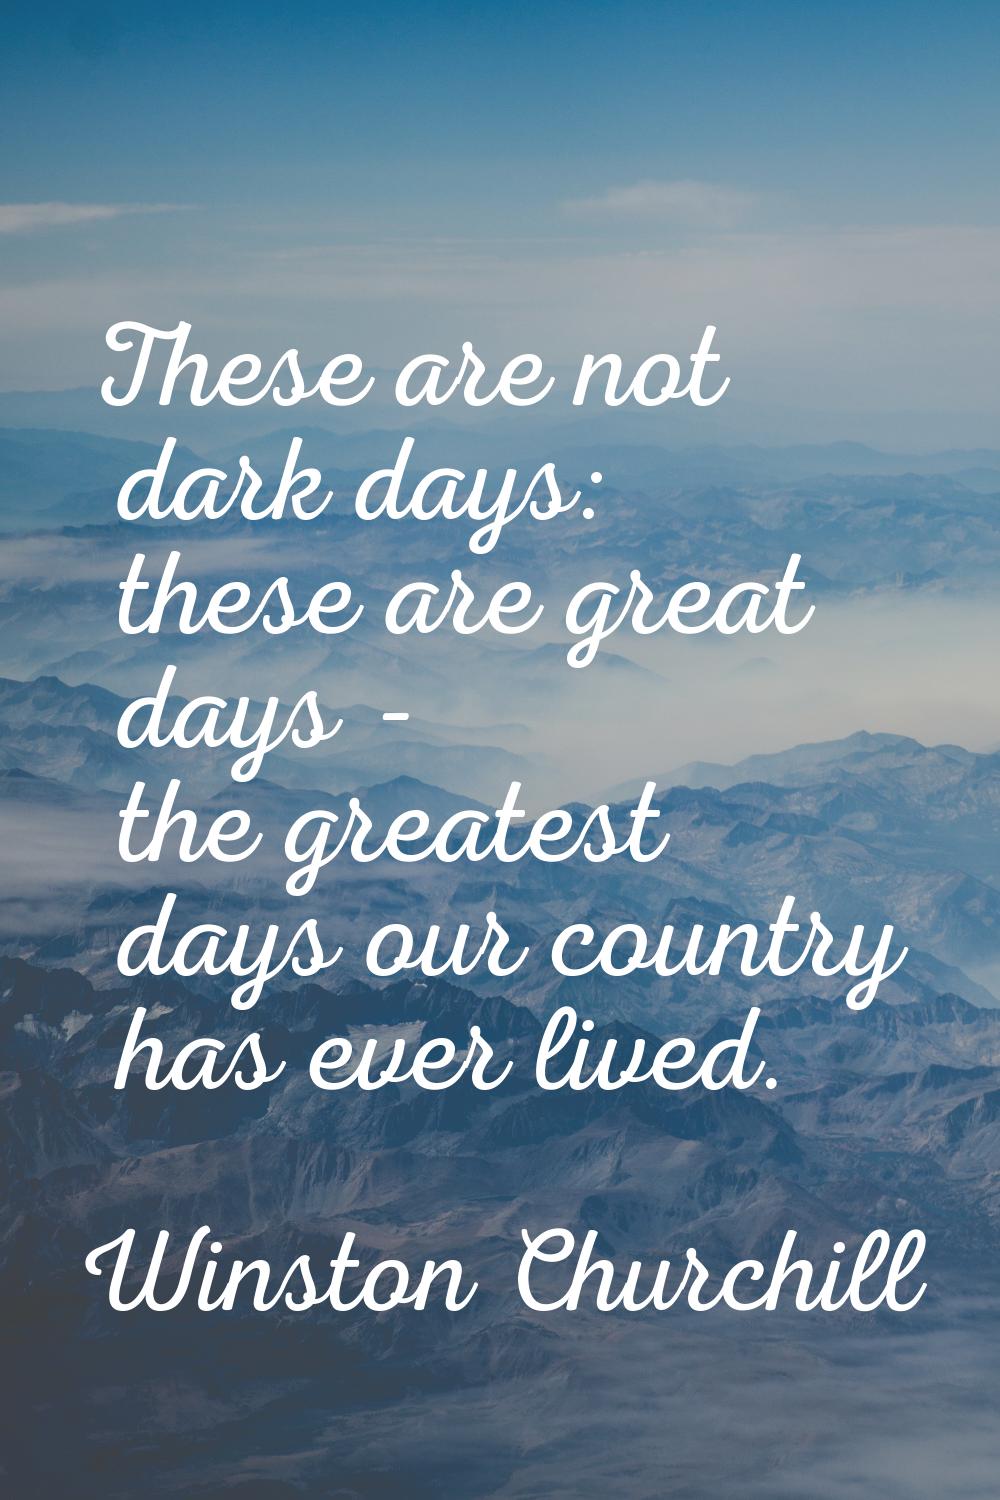 These are not dark days: these are great days - the greatest days our country has ever lived.